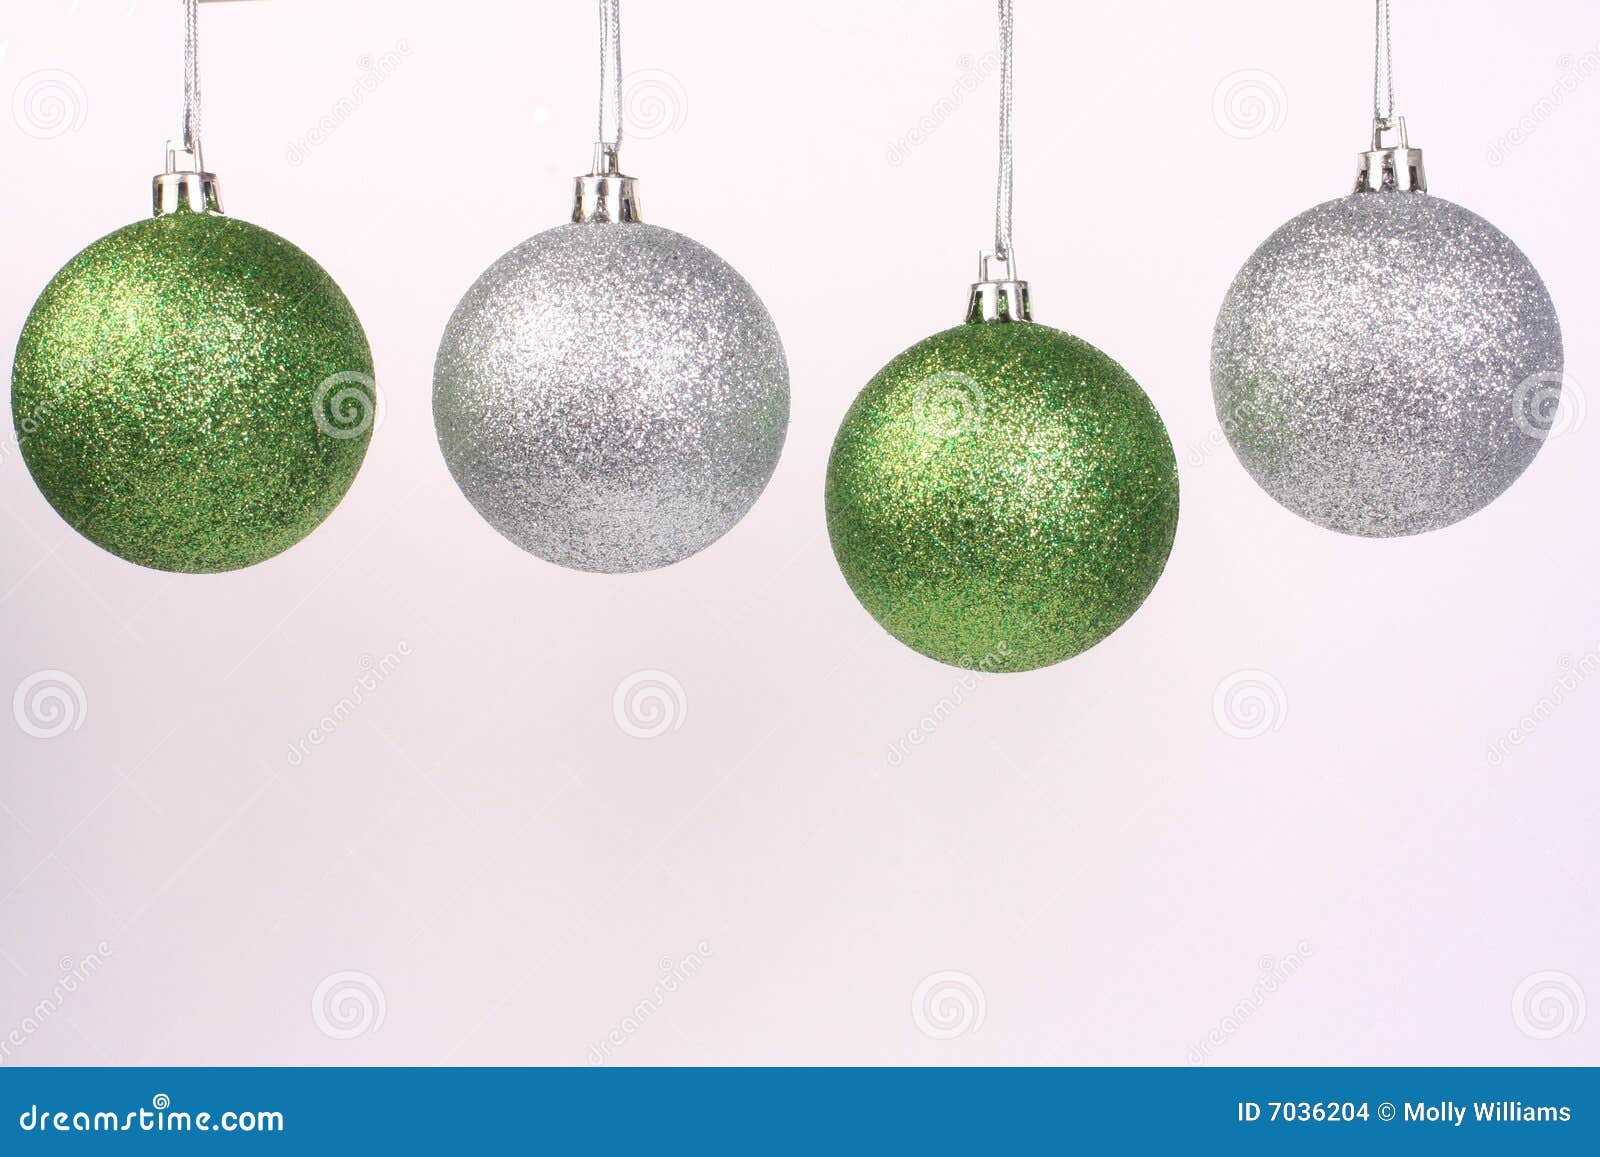 Green and Silver Ornaments 2 Stock Photo - Image of bauble, holiday ...